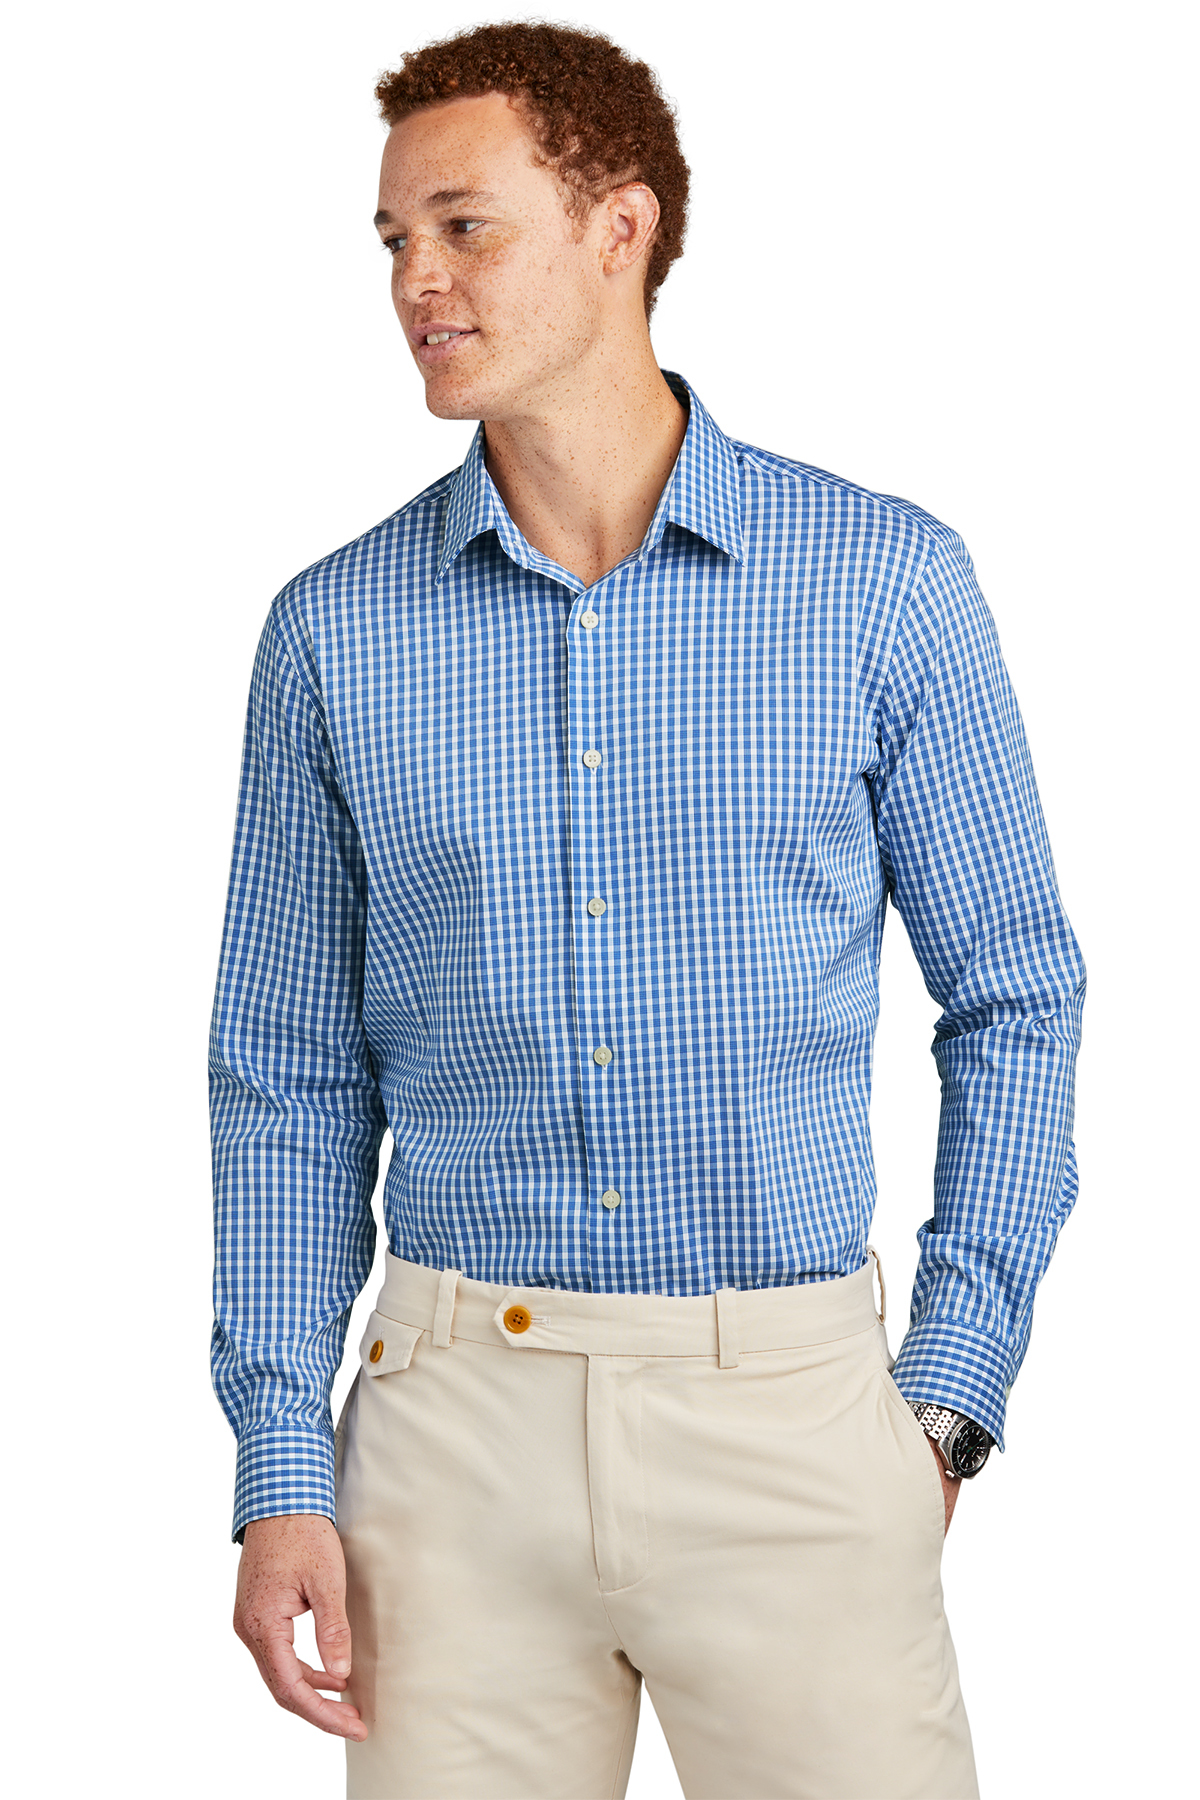 Summer Style Picks For Men From Brooks Brothers - Saddle Creek